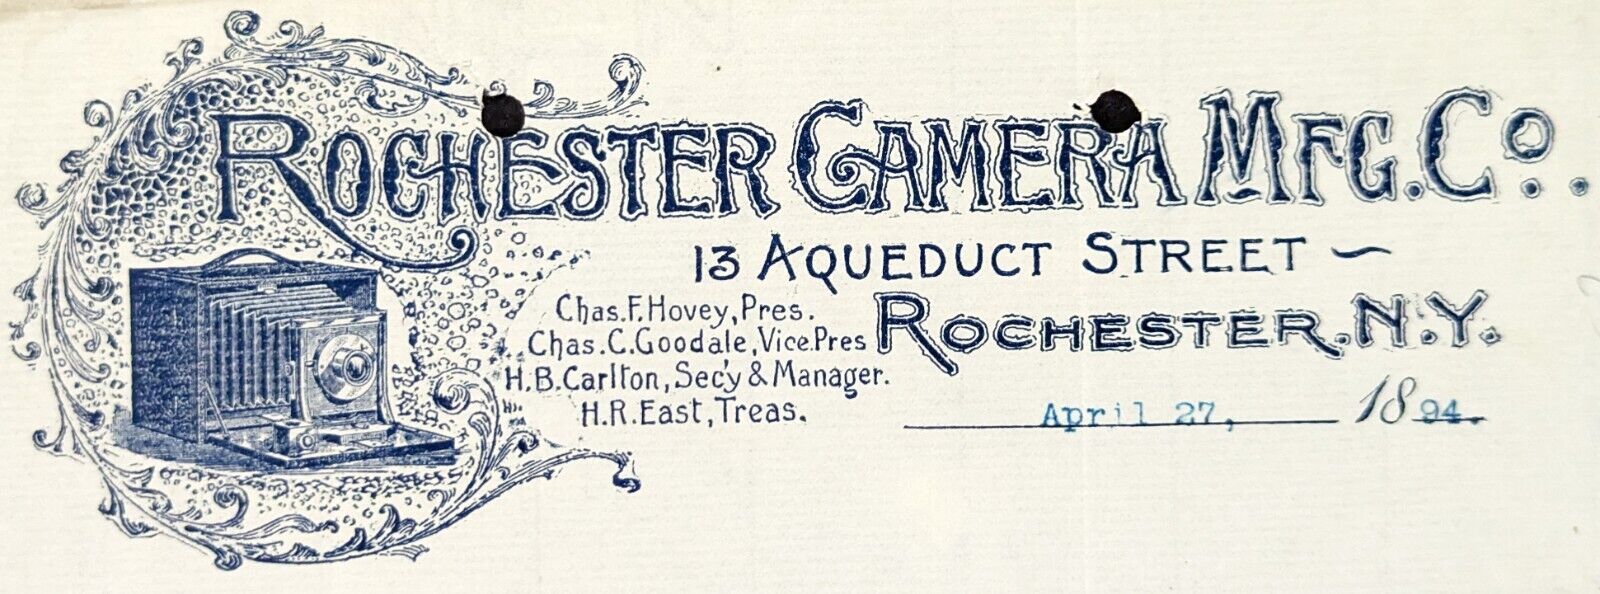 Antique 1894 Rochester Camera Manufacturing Co Graphic New York Letterhead